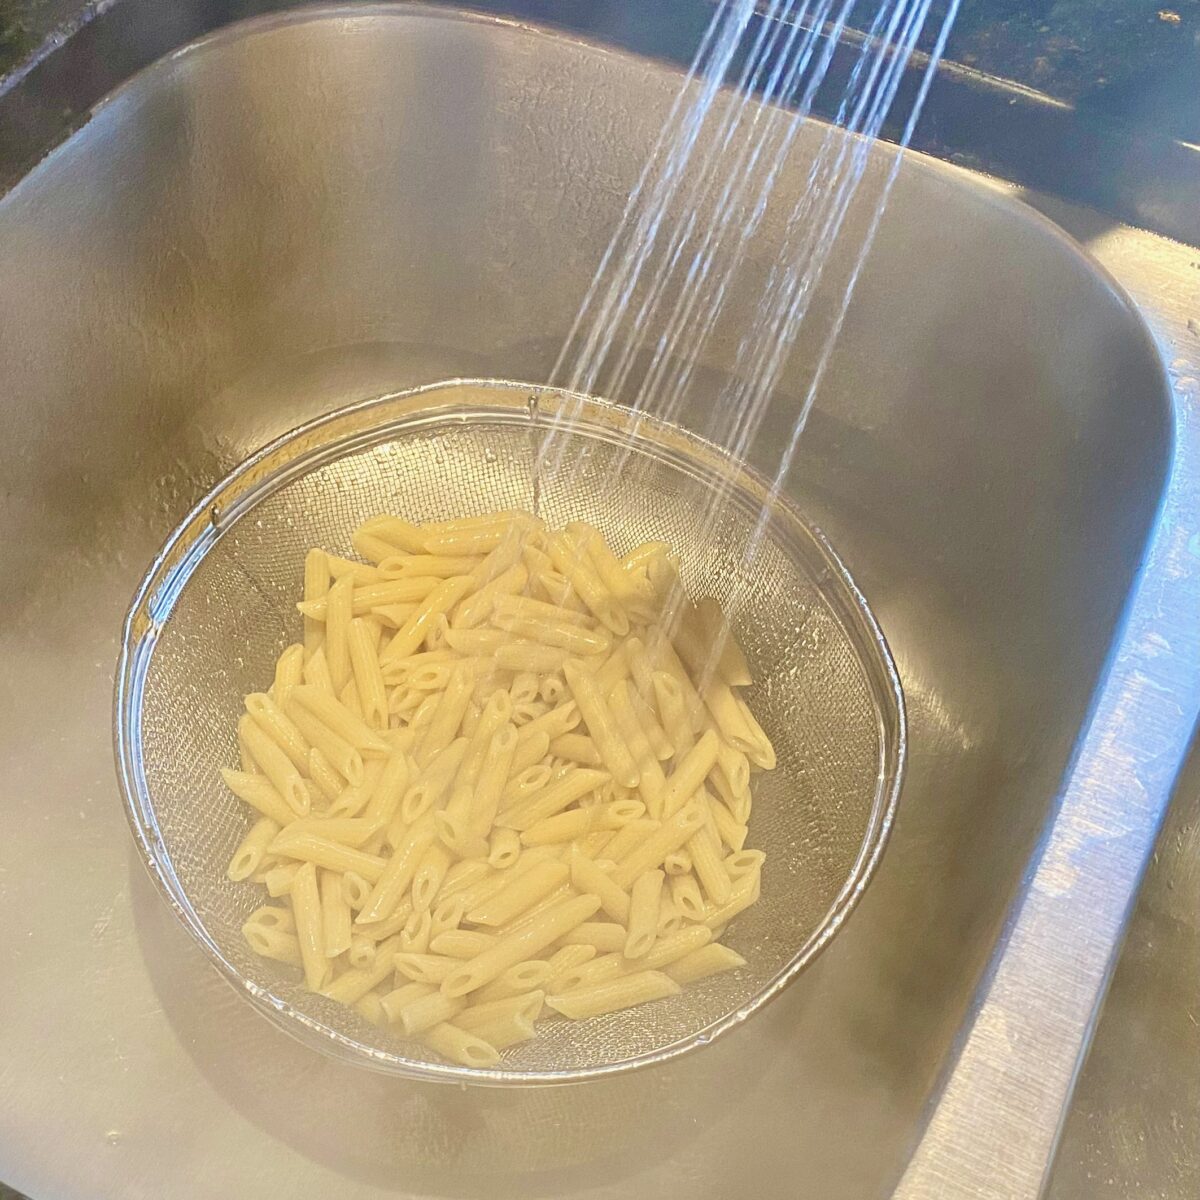 Draining the pasta and rinsing in cold water.